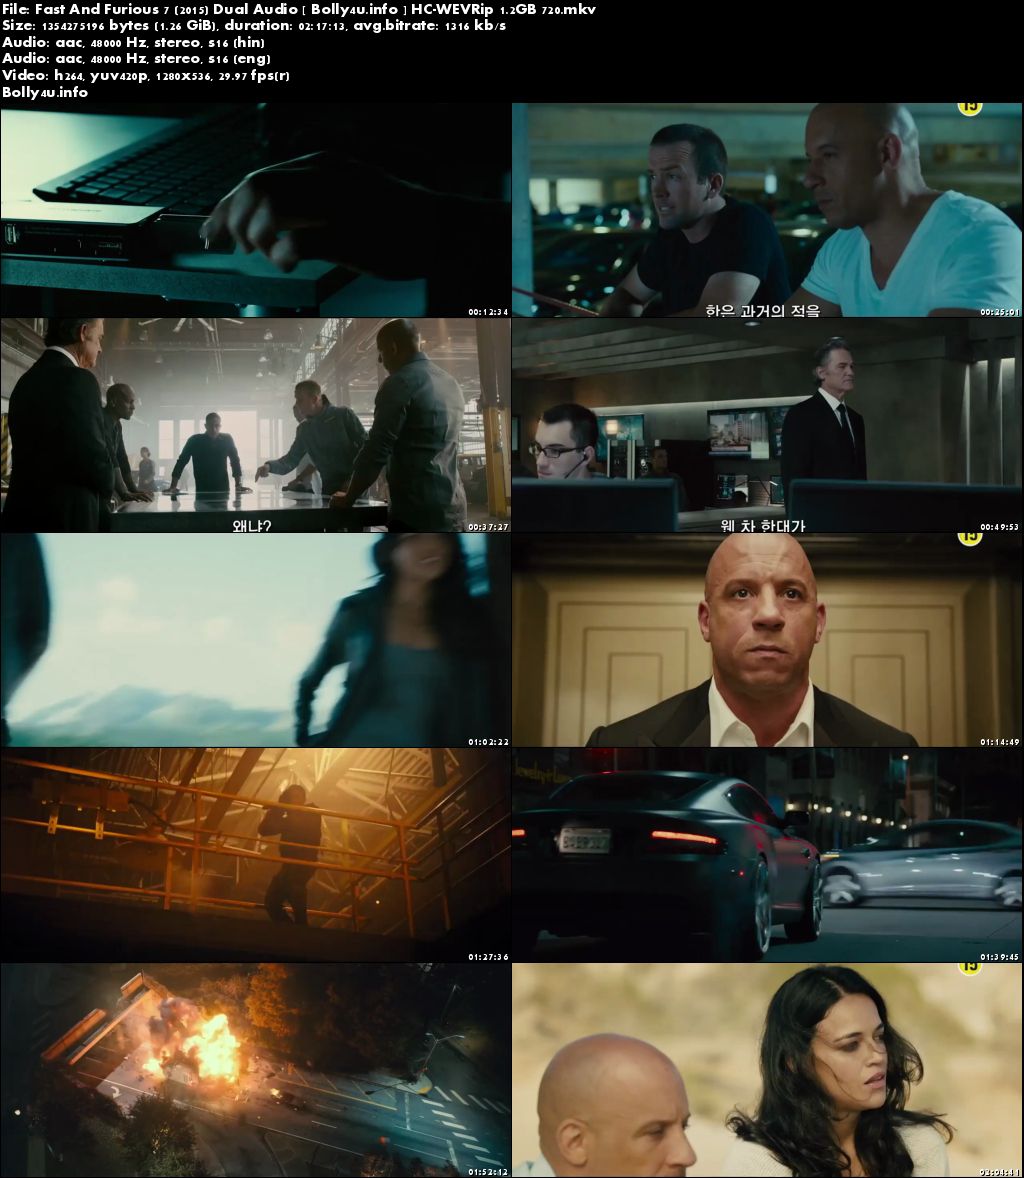 Download torrent fast and furious 8 hindi engineering